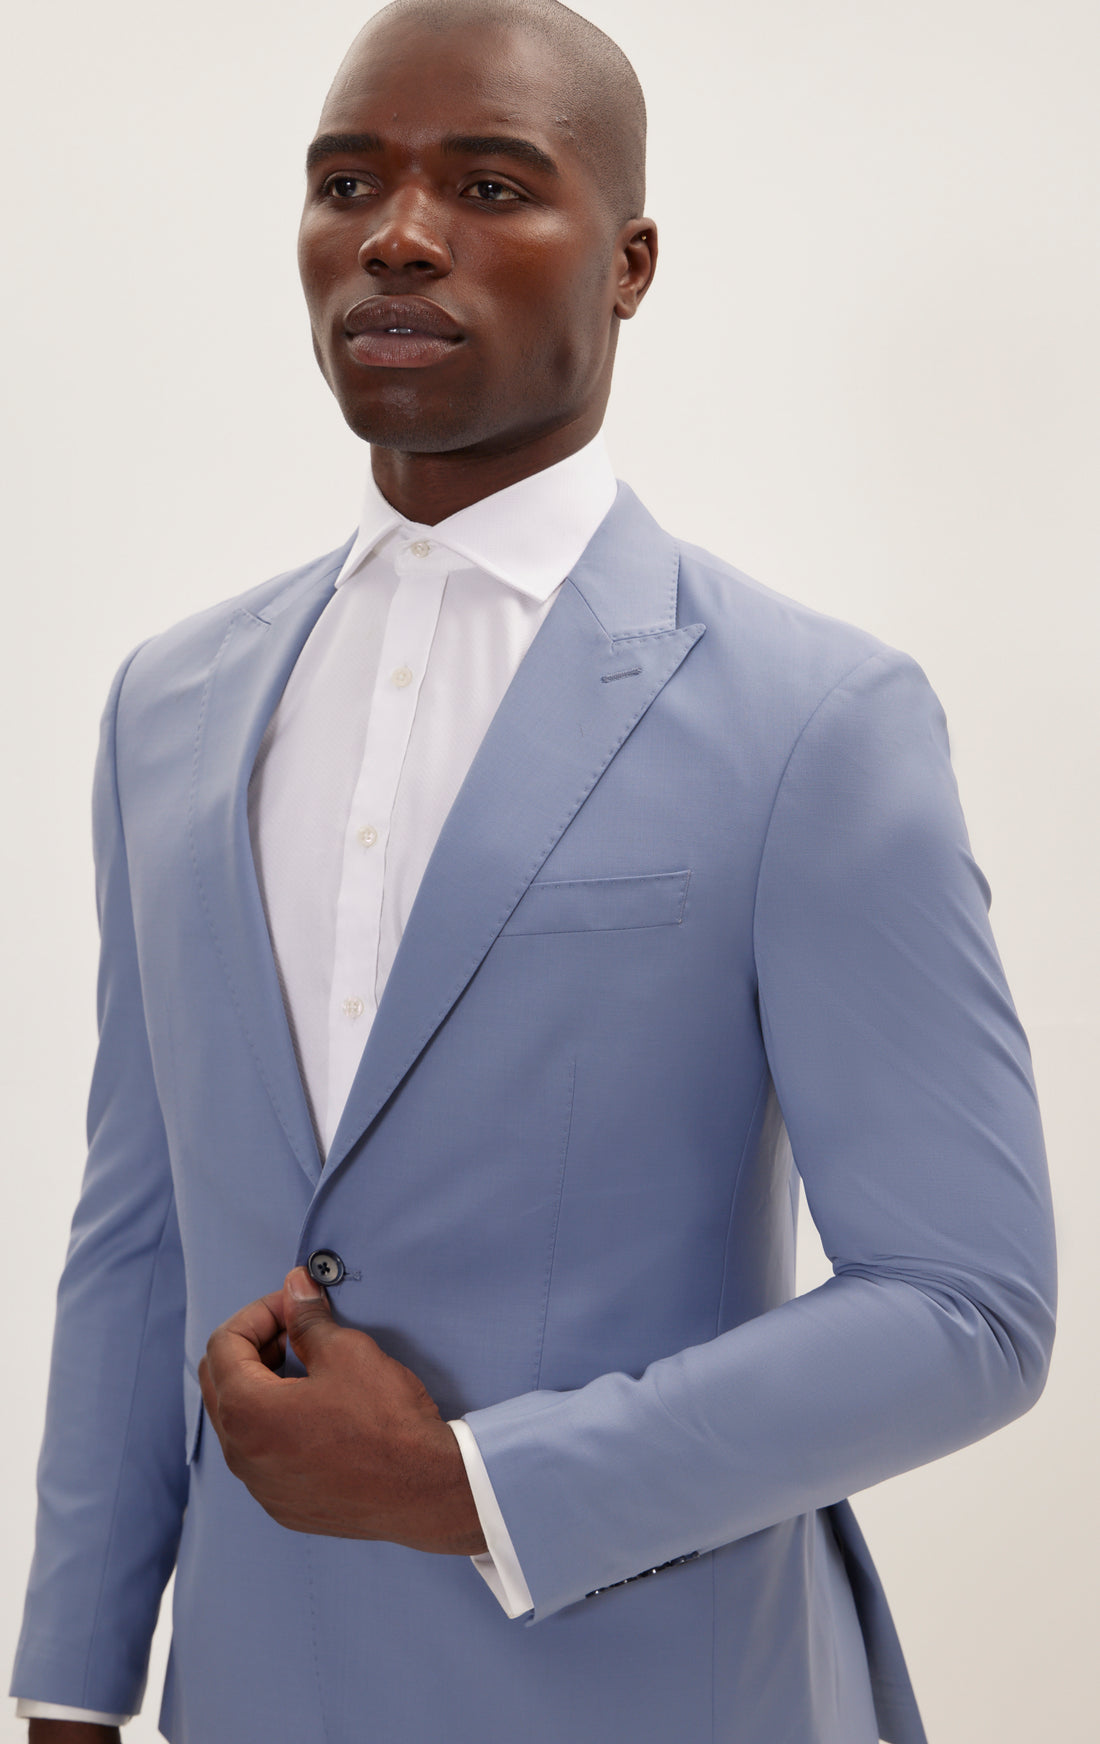 Super 120S Merino Wool Single Breasted Suit - Monument Grey Ish Blue